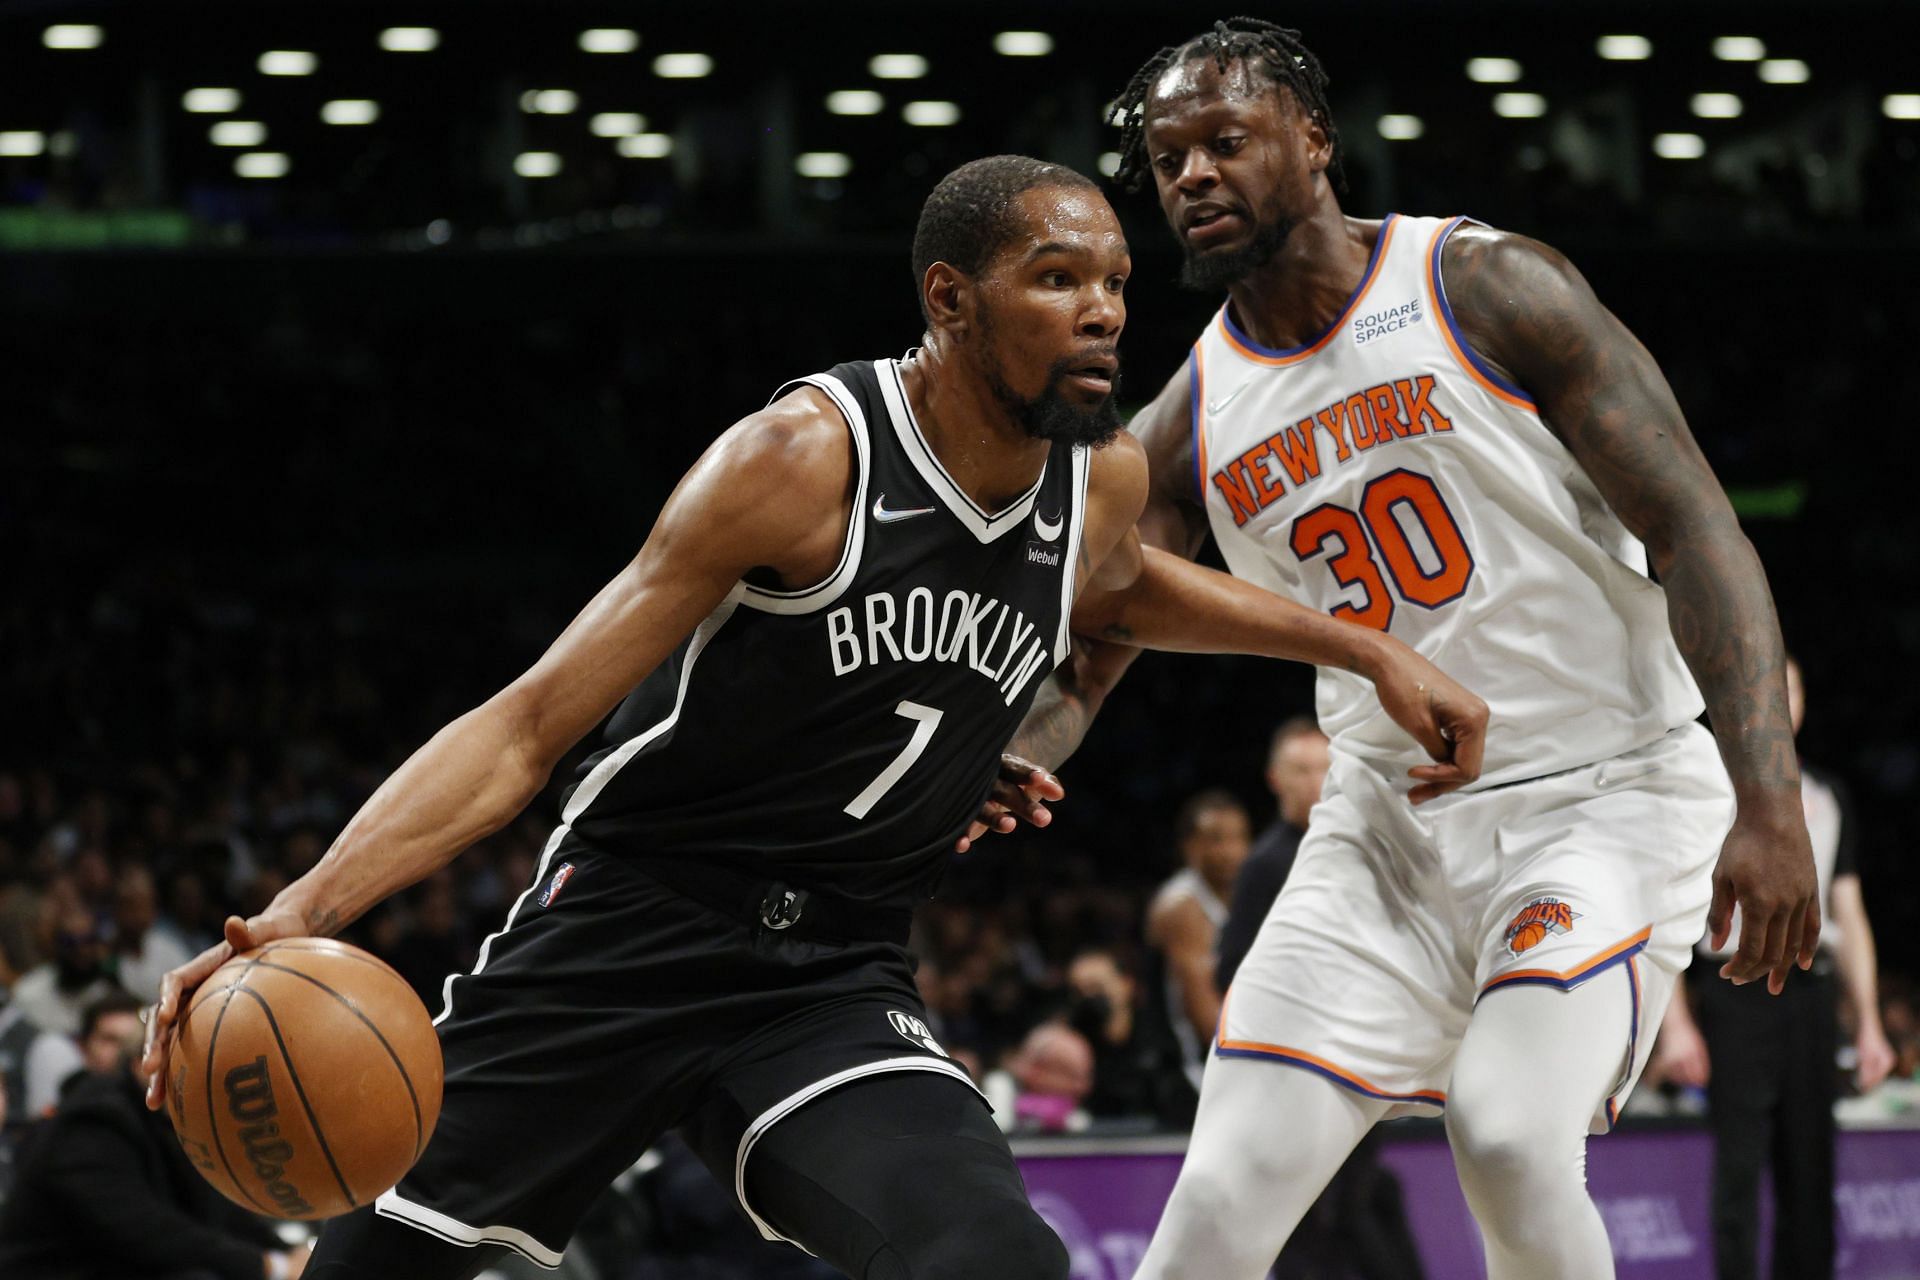 Kevin Durant of the Brooklyn Nets dribbles against Julius Randle of the New York Knicks during the first half at Barclays Center on Sunday in the Brooklyn borough of New York City.